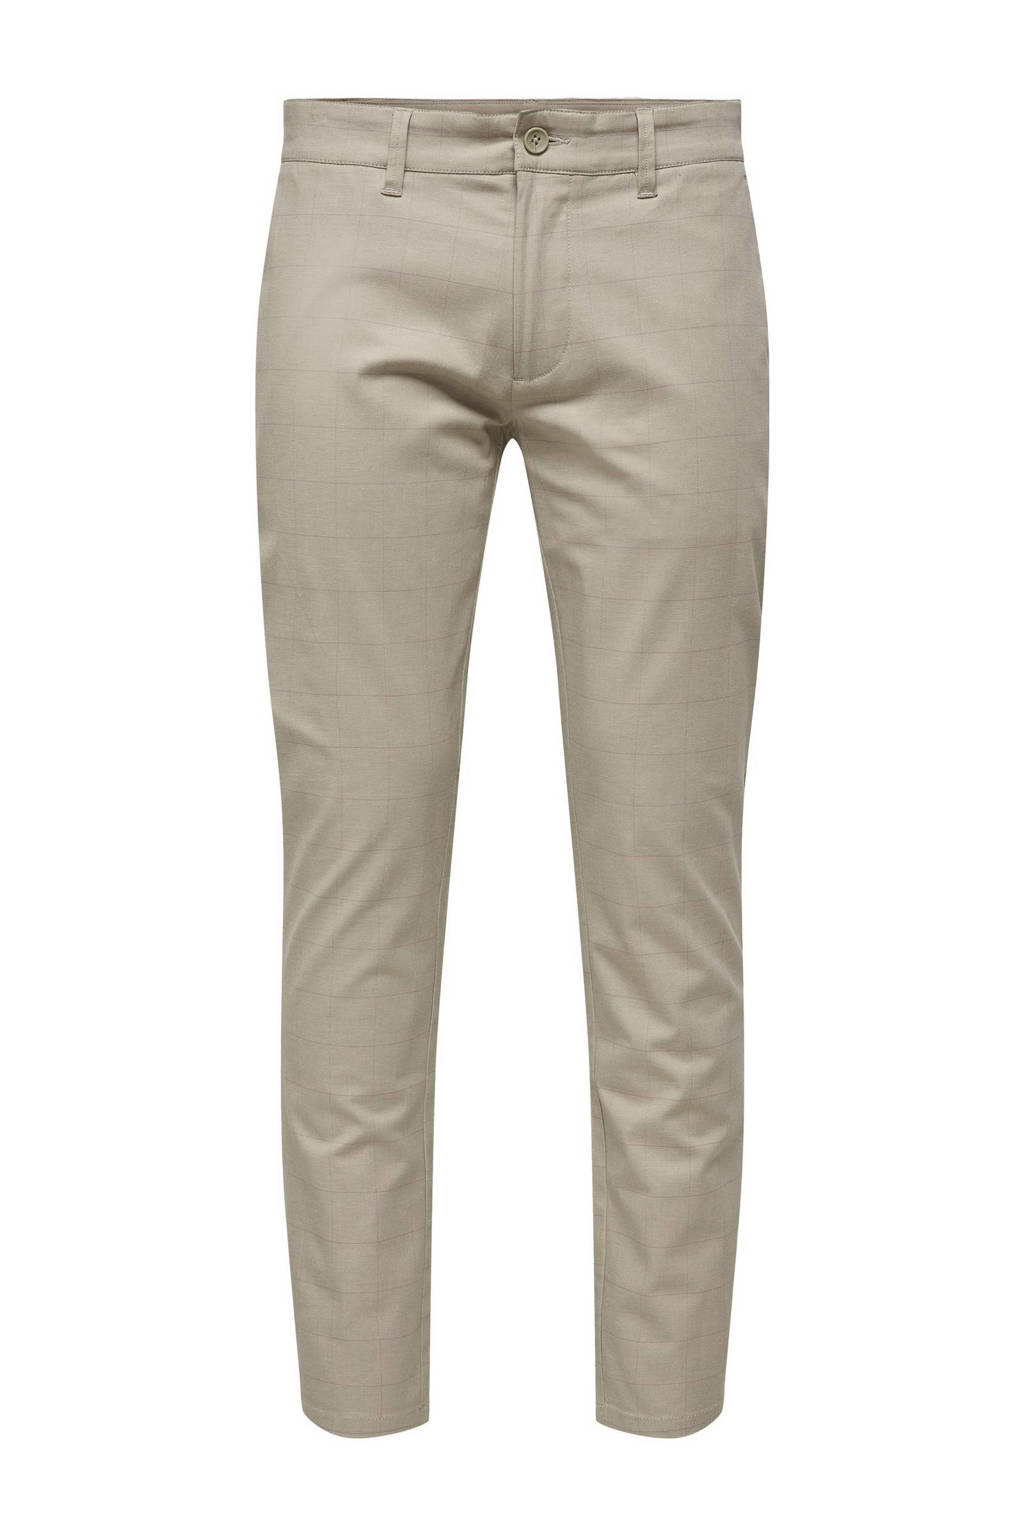 ONLY & SONS geruite tapered fit chino ONSMARK chinchilla